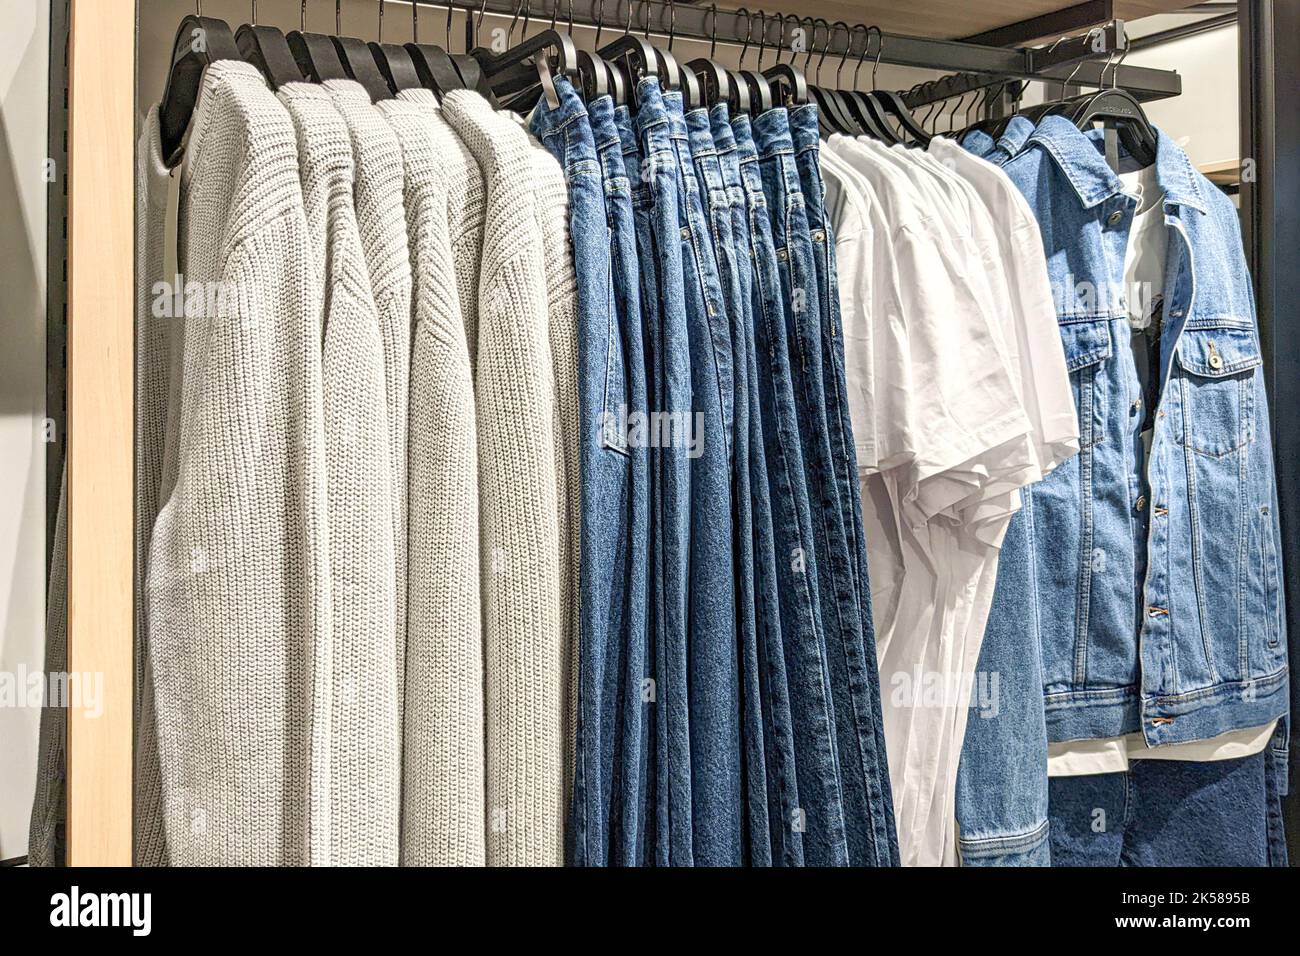 Justice for girls retail clothing store Stock Photo - Alamy